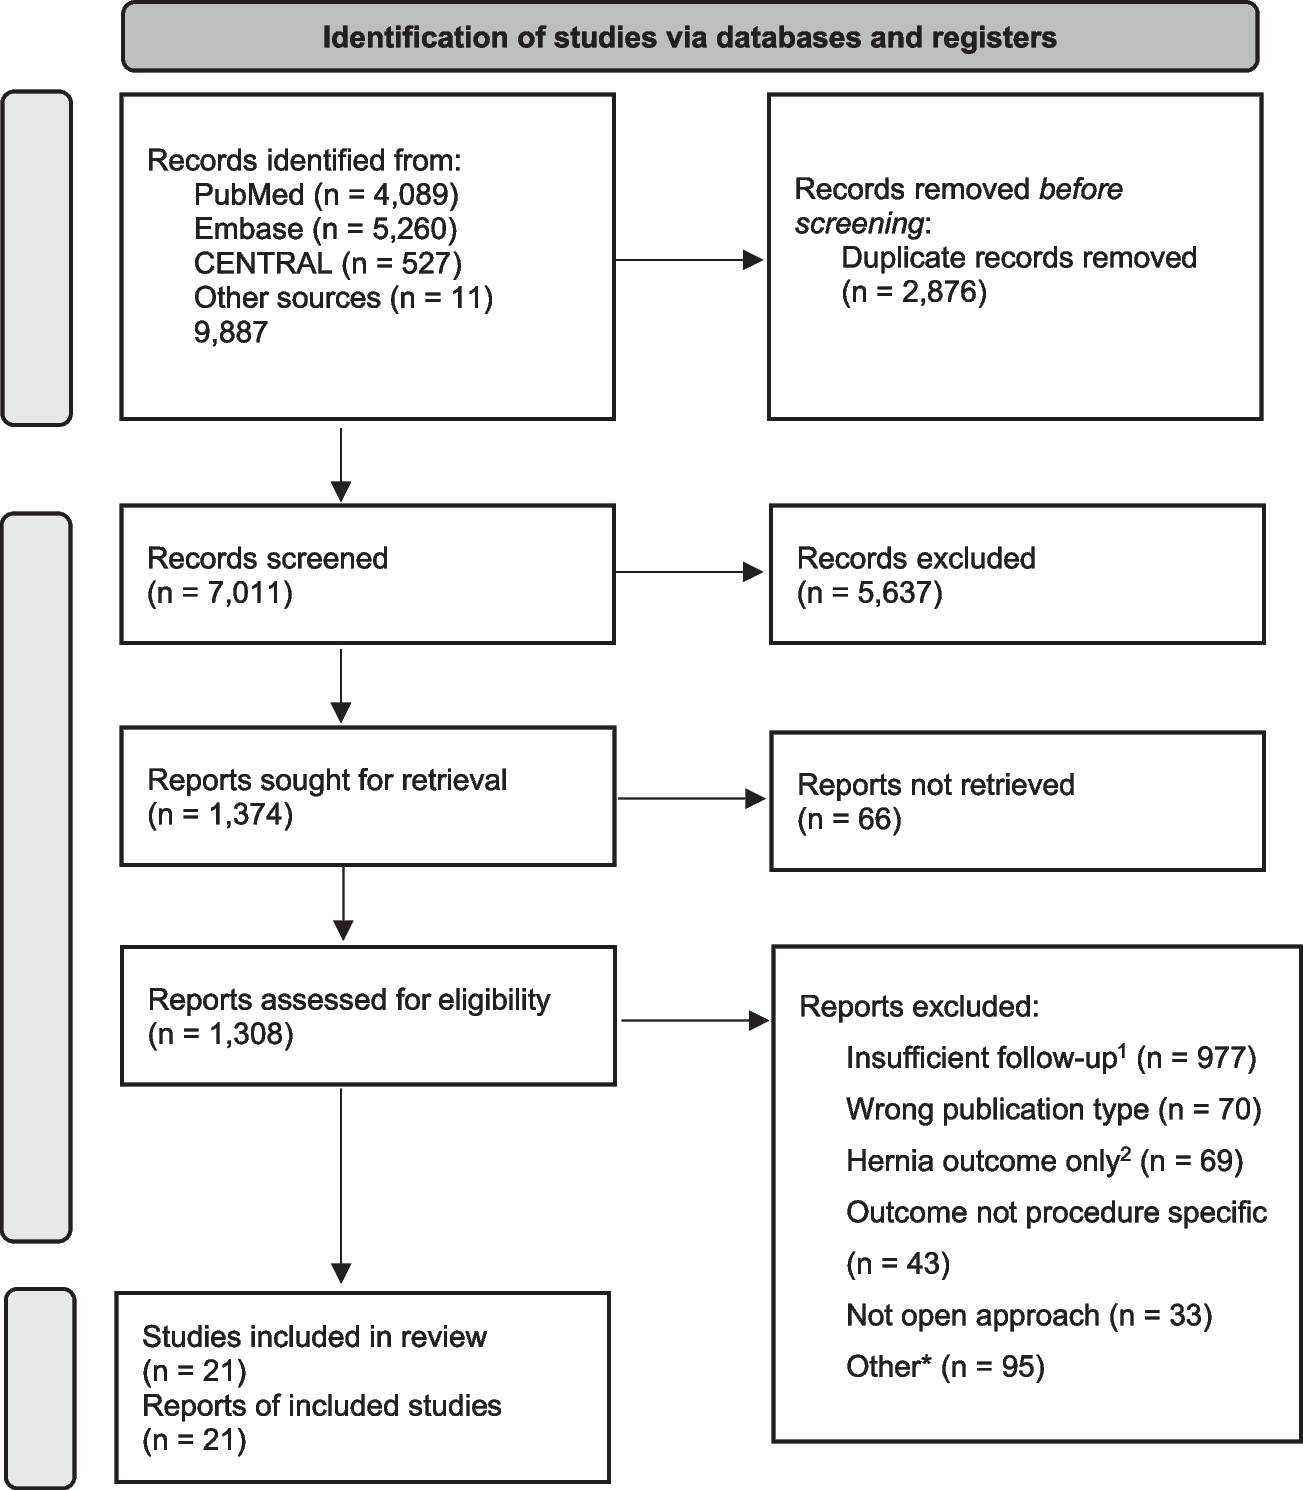 Long-term Mortality and Intestinal Obstruction after Open Cholecystectomy: A Systematic Review and Meta-analysis